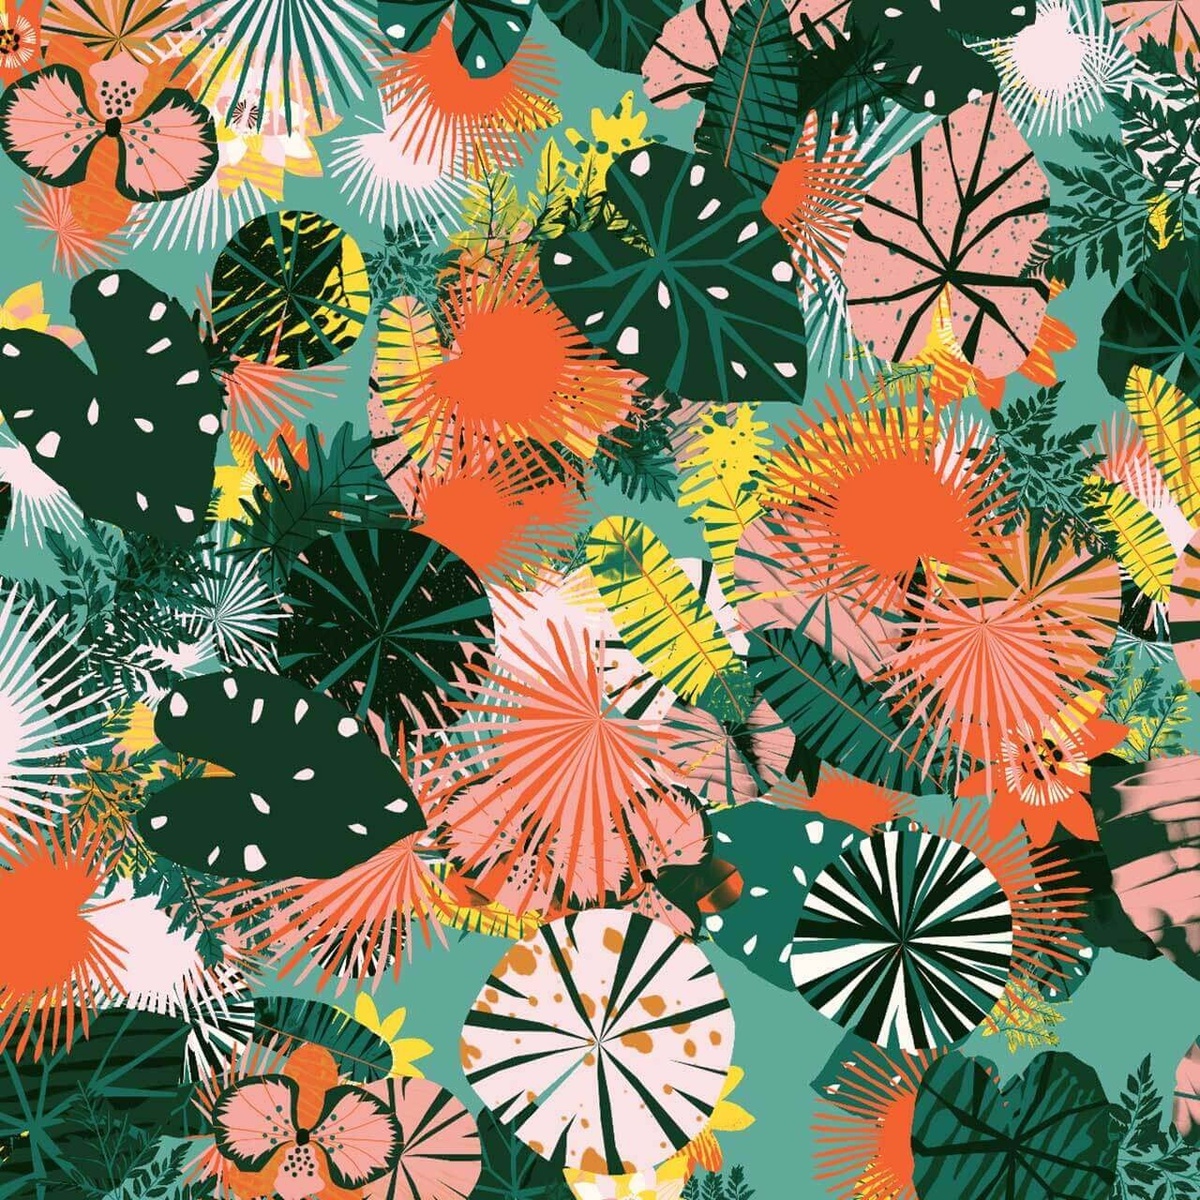 A colourful surface covered in flora illustrations, overlapping with each other